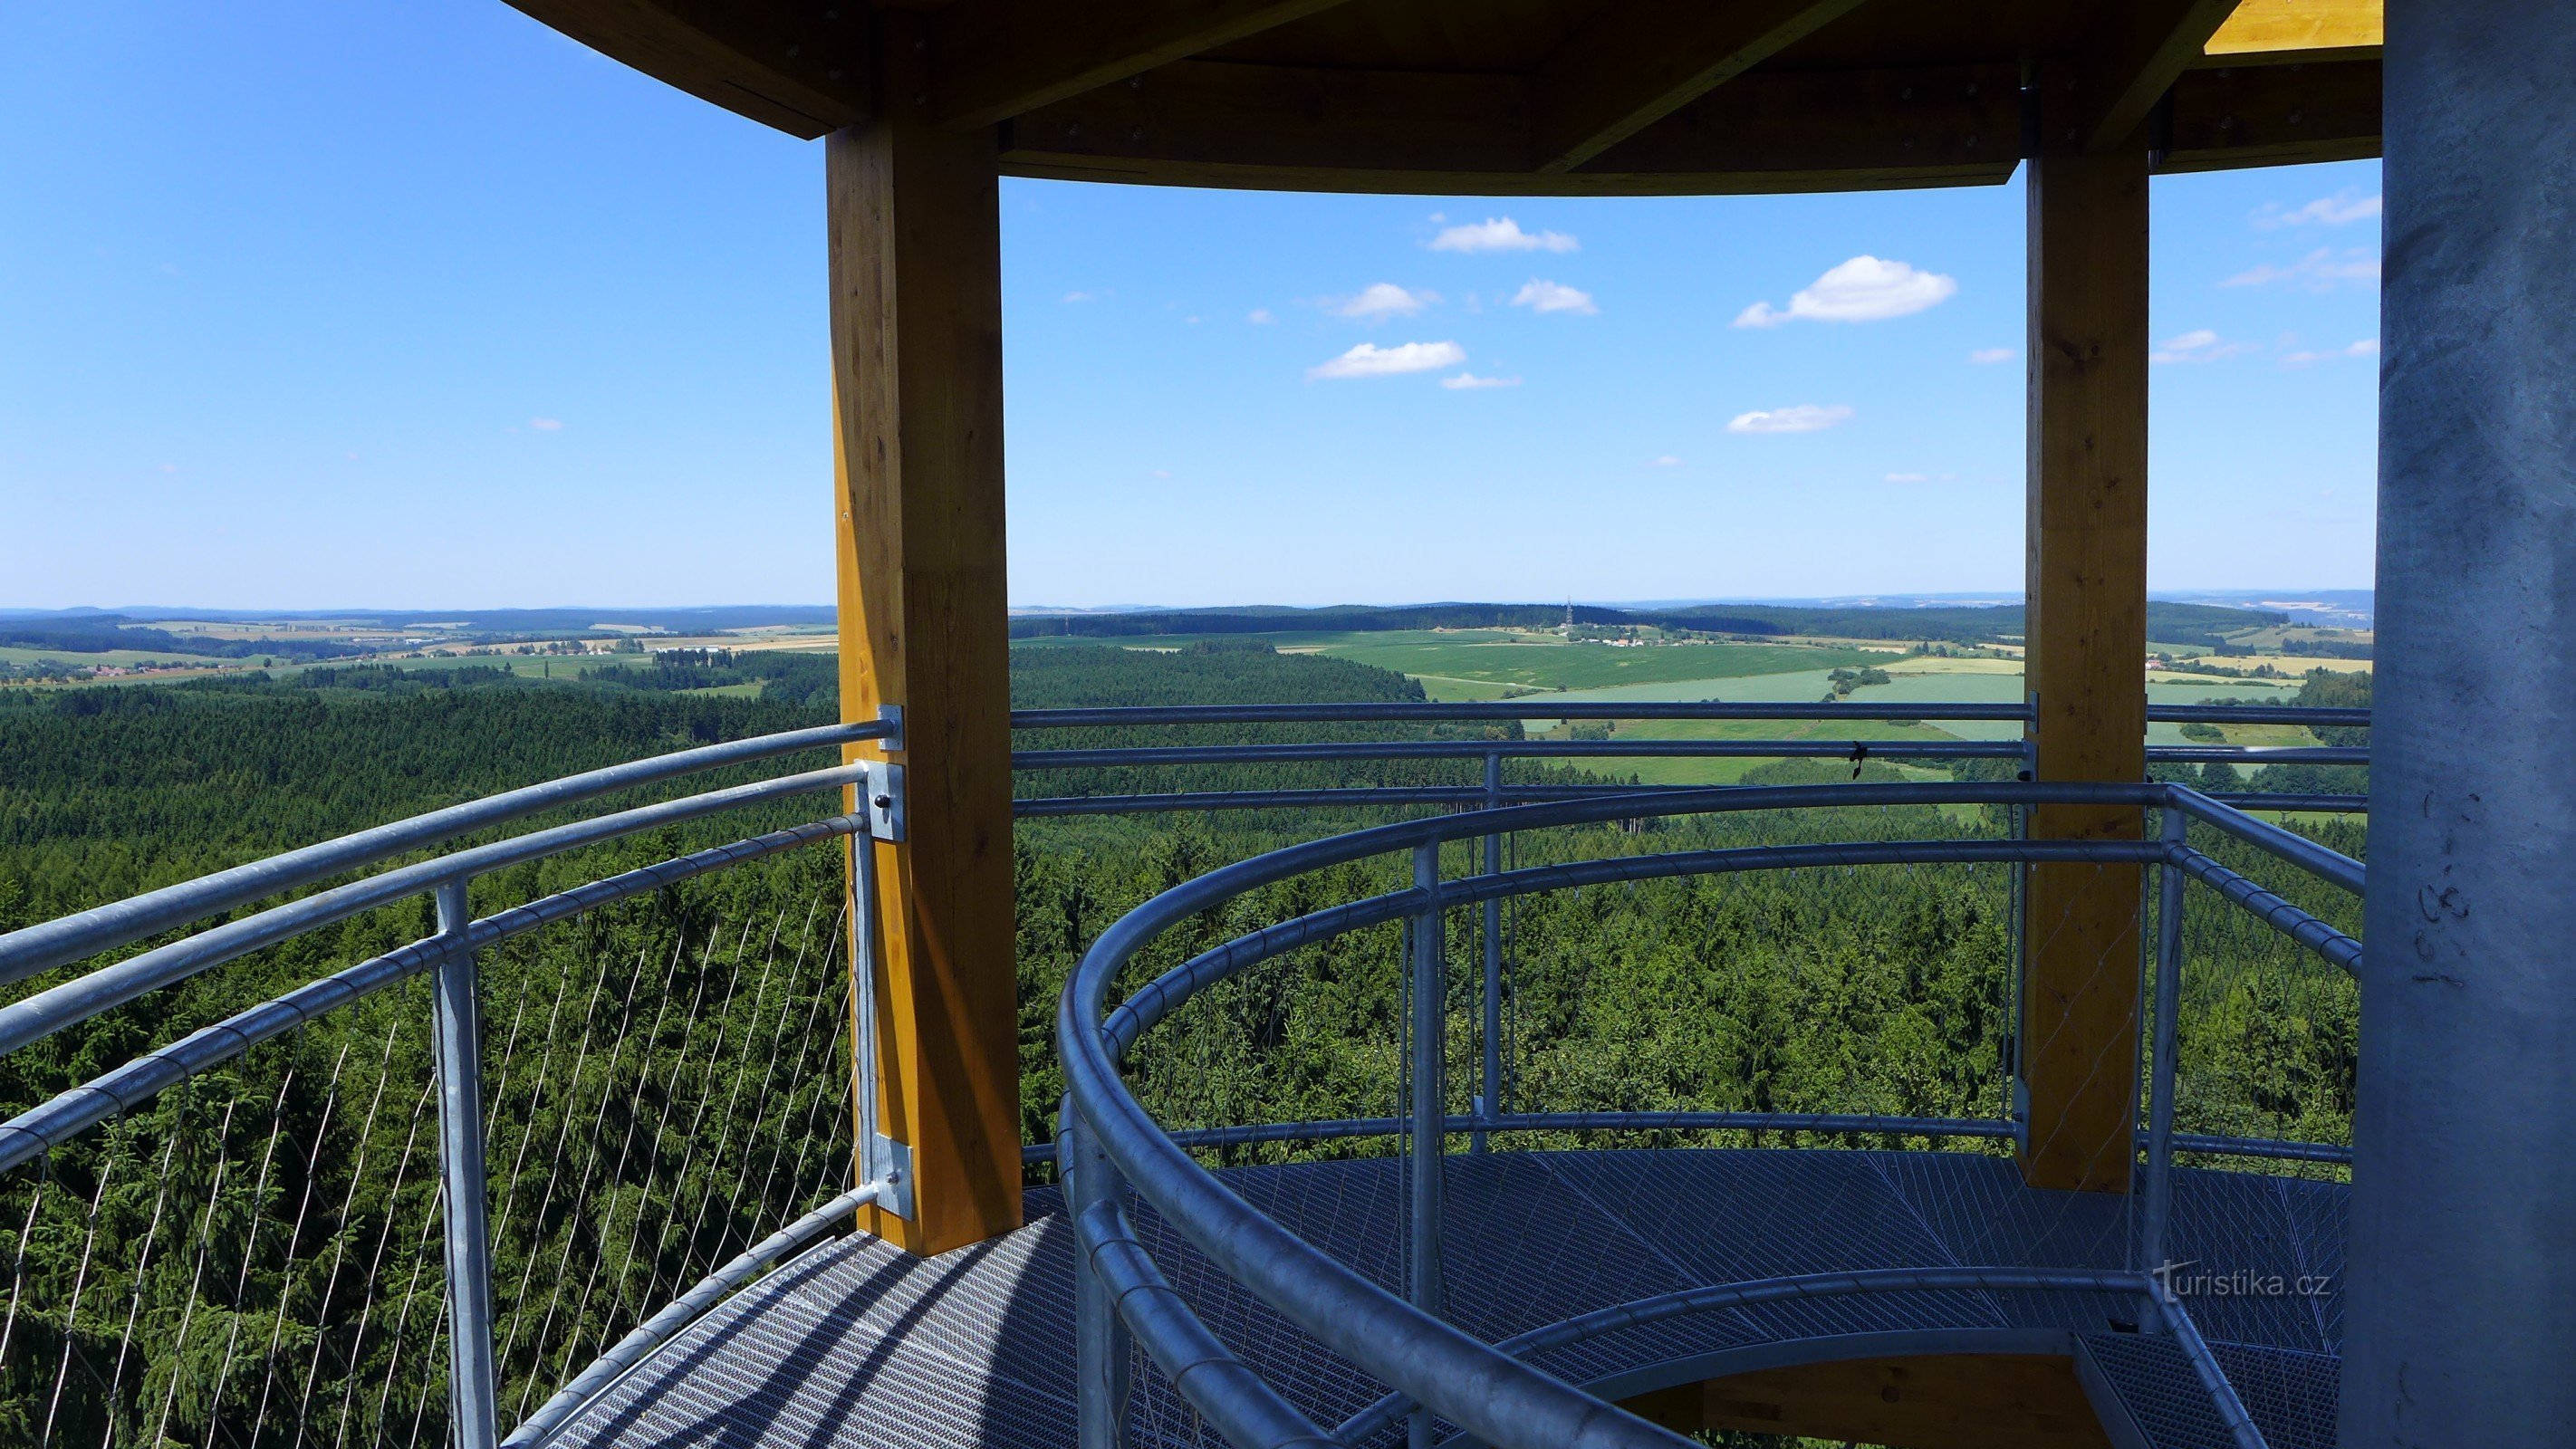 View from the observation tower (photo by Eva Koutná)